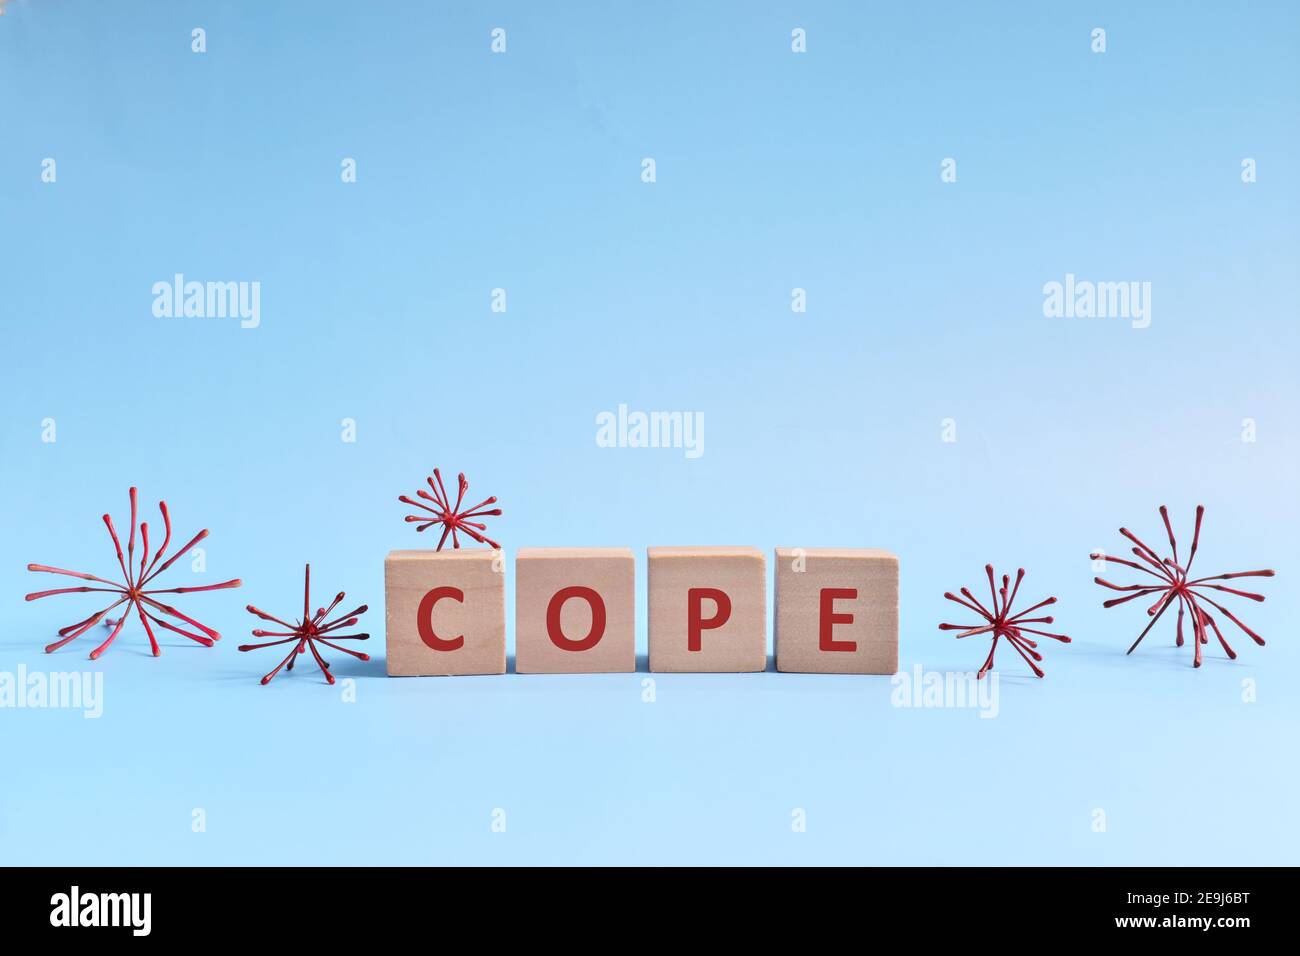 Cope word in wooden blocks on blue background. Coping with anxiety, stress, ptsd and depression during covid-19 pandemic concept. Stock Photo